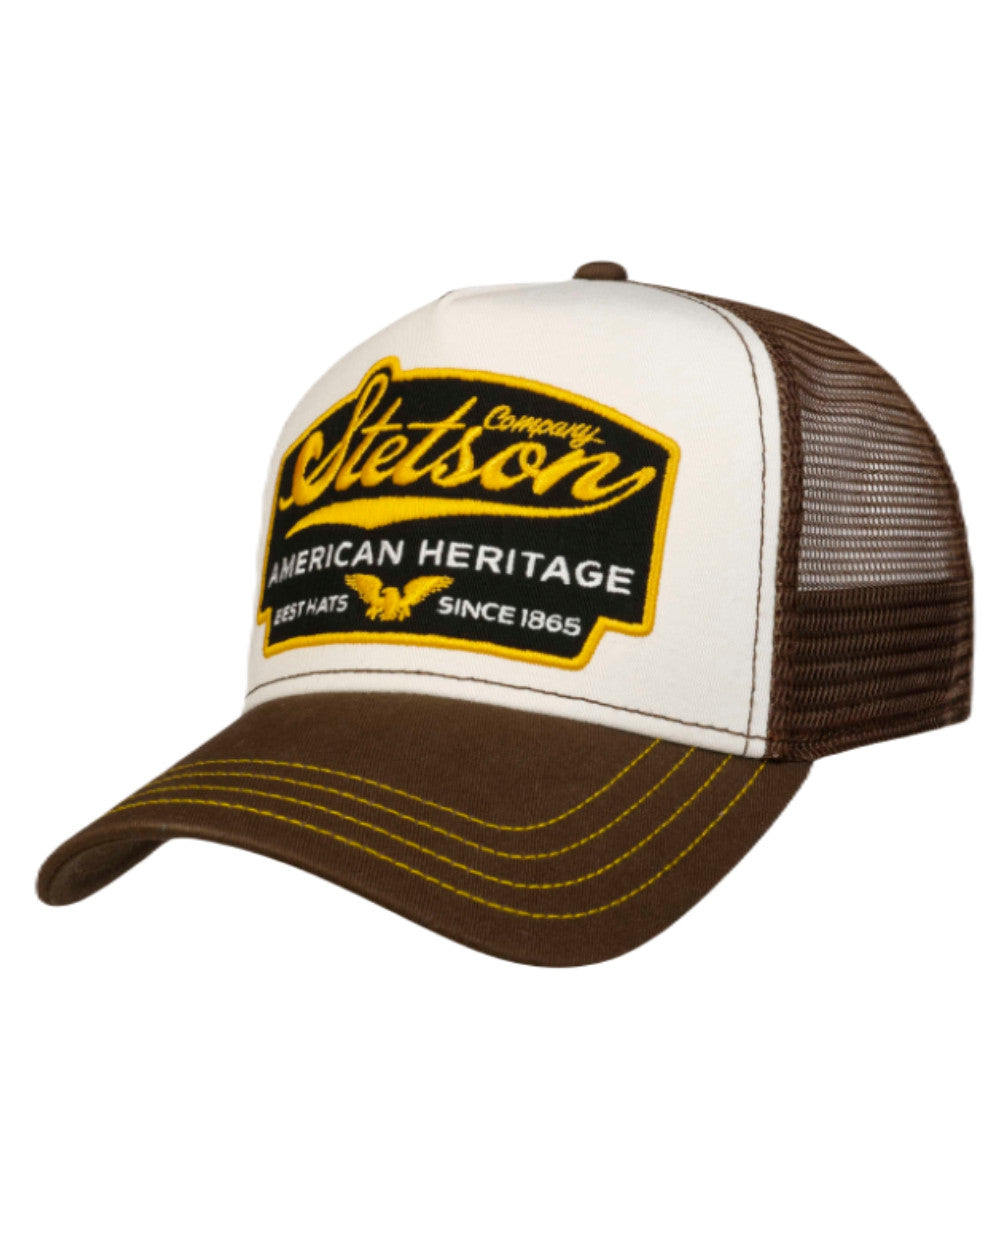 Brown/White coloured Stetson American Heritage Trucker Cap on White background 